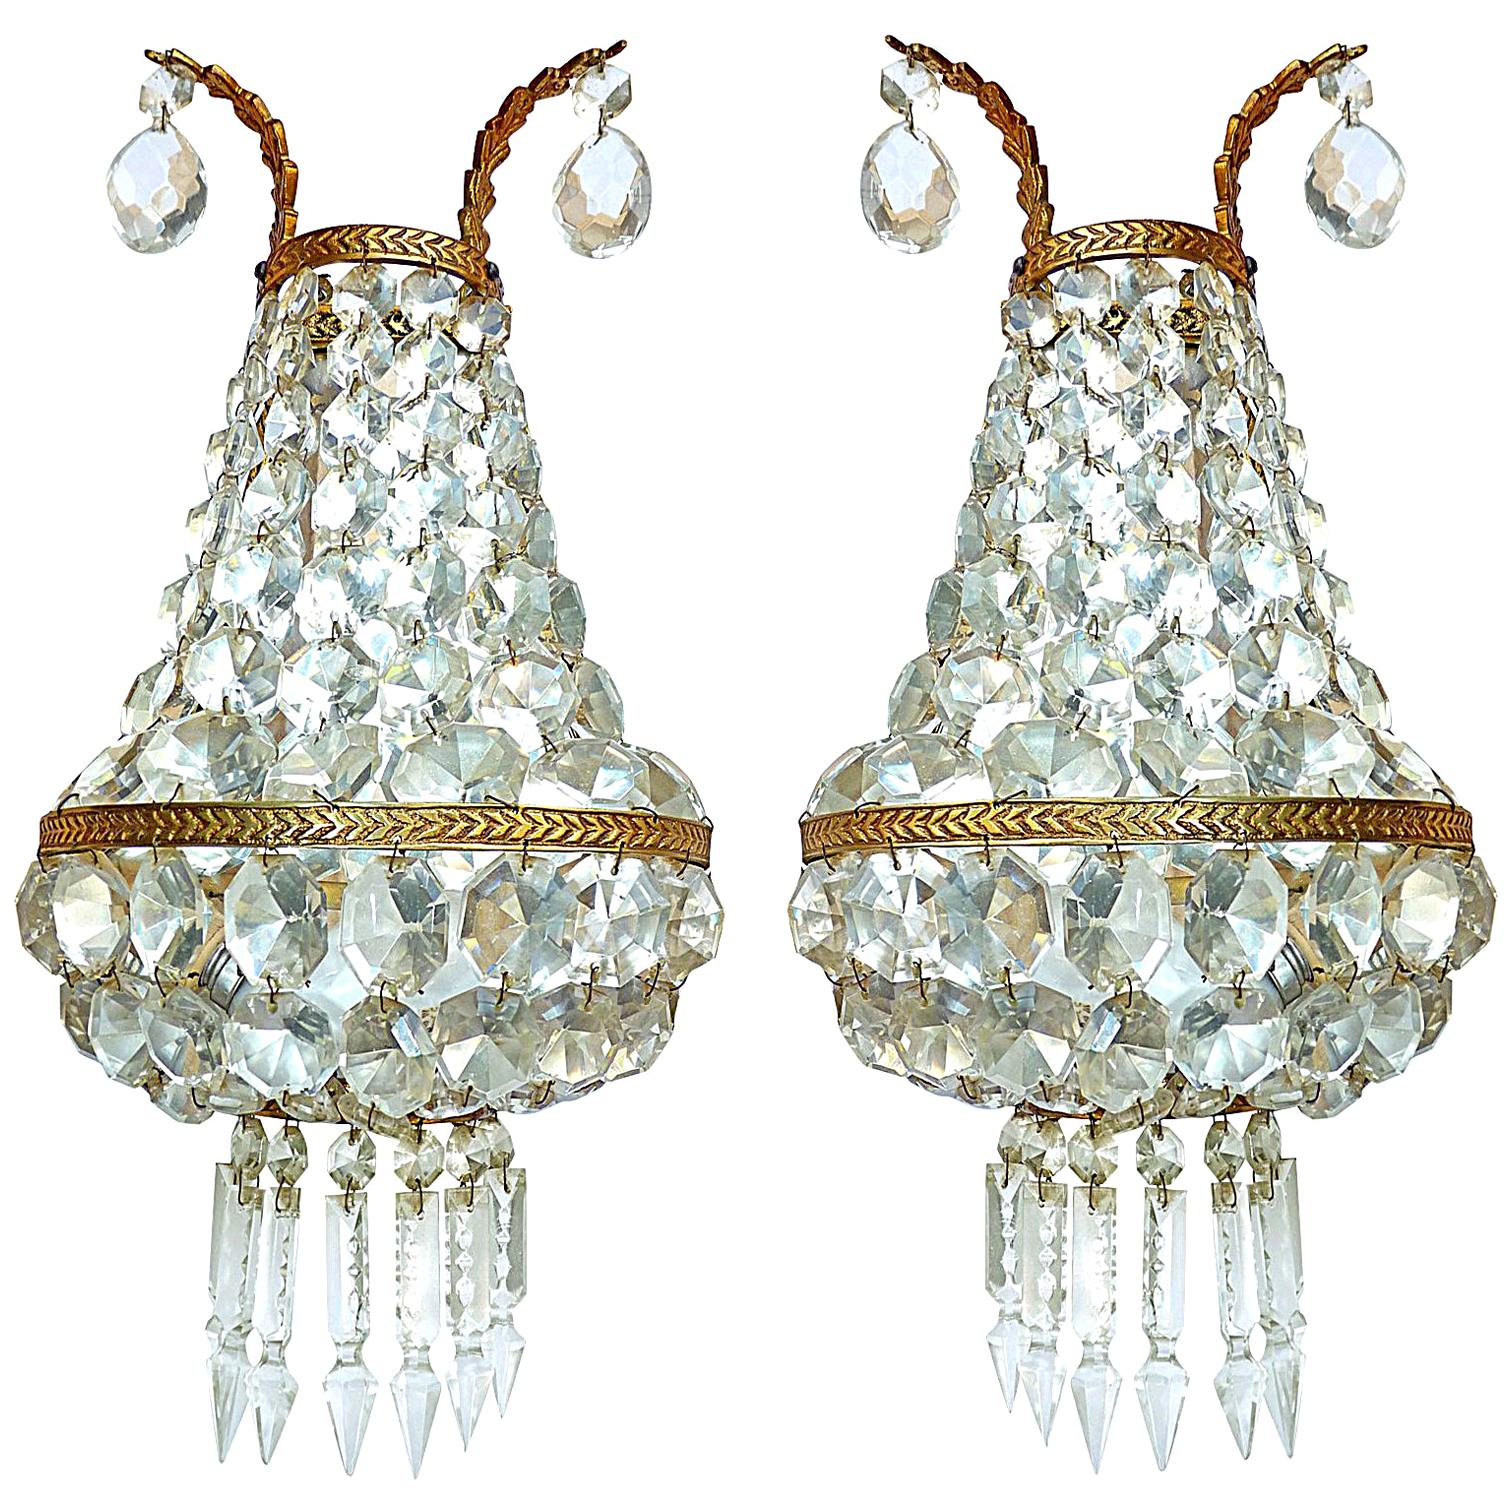 French Empire Gilt Bronze Mirrored Crystal Double Light Sconces Wall Lights Pair